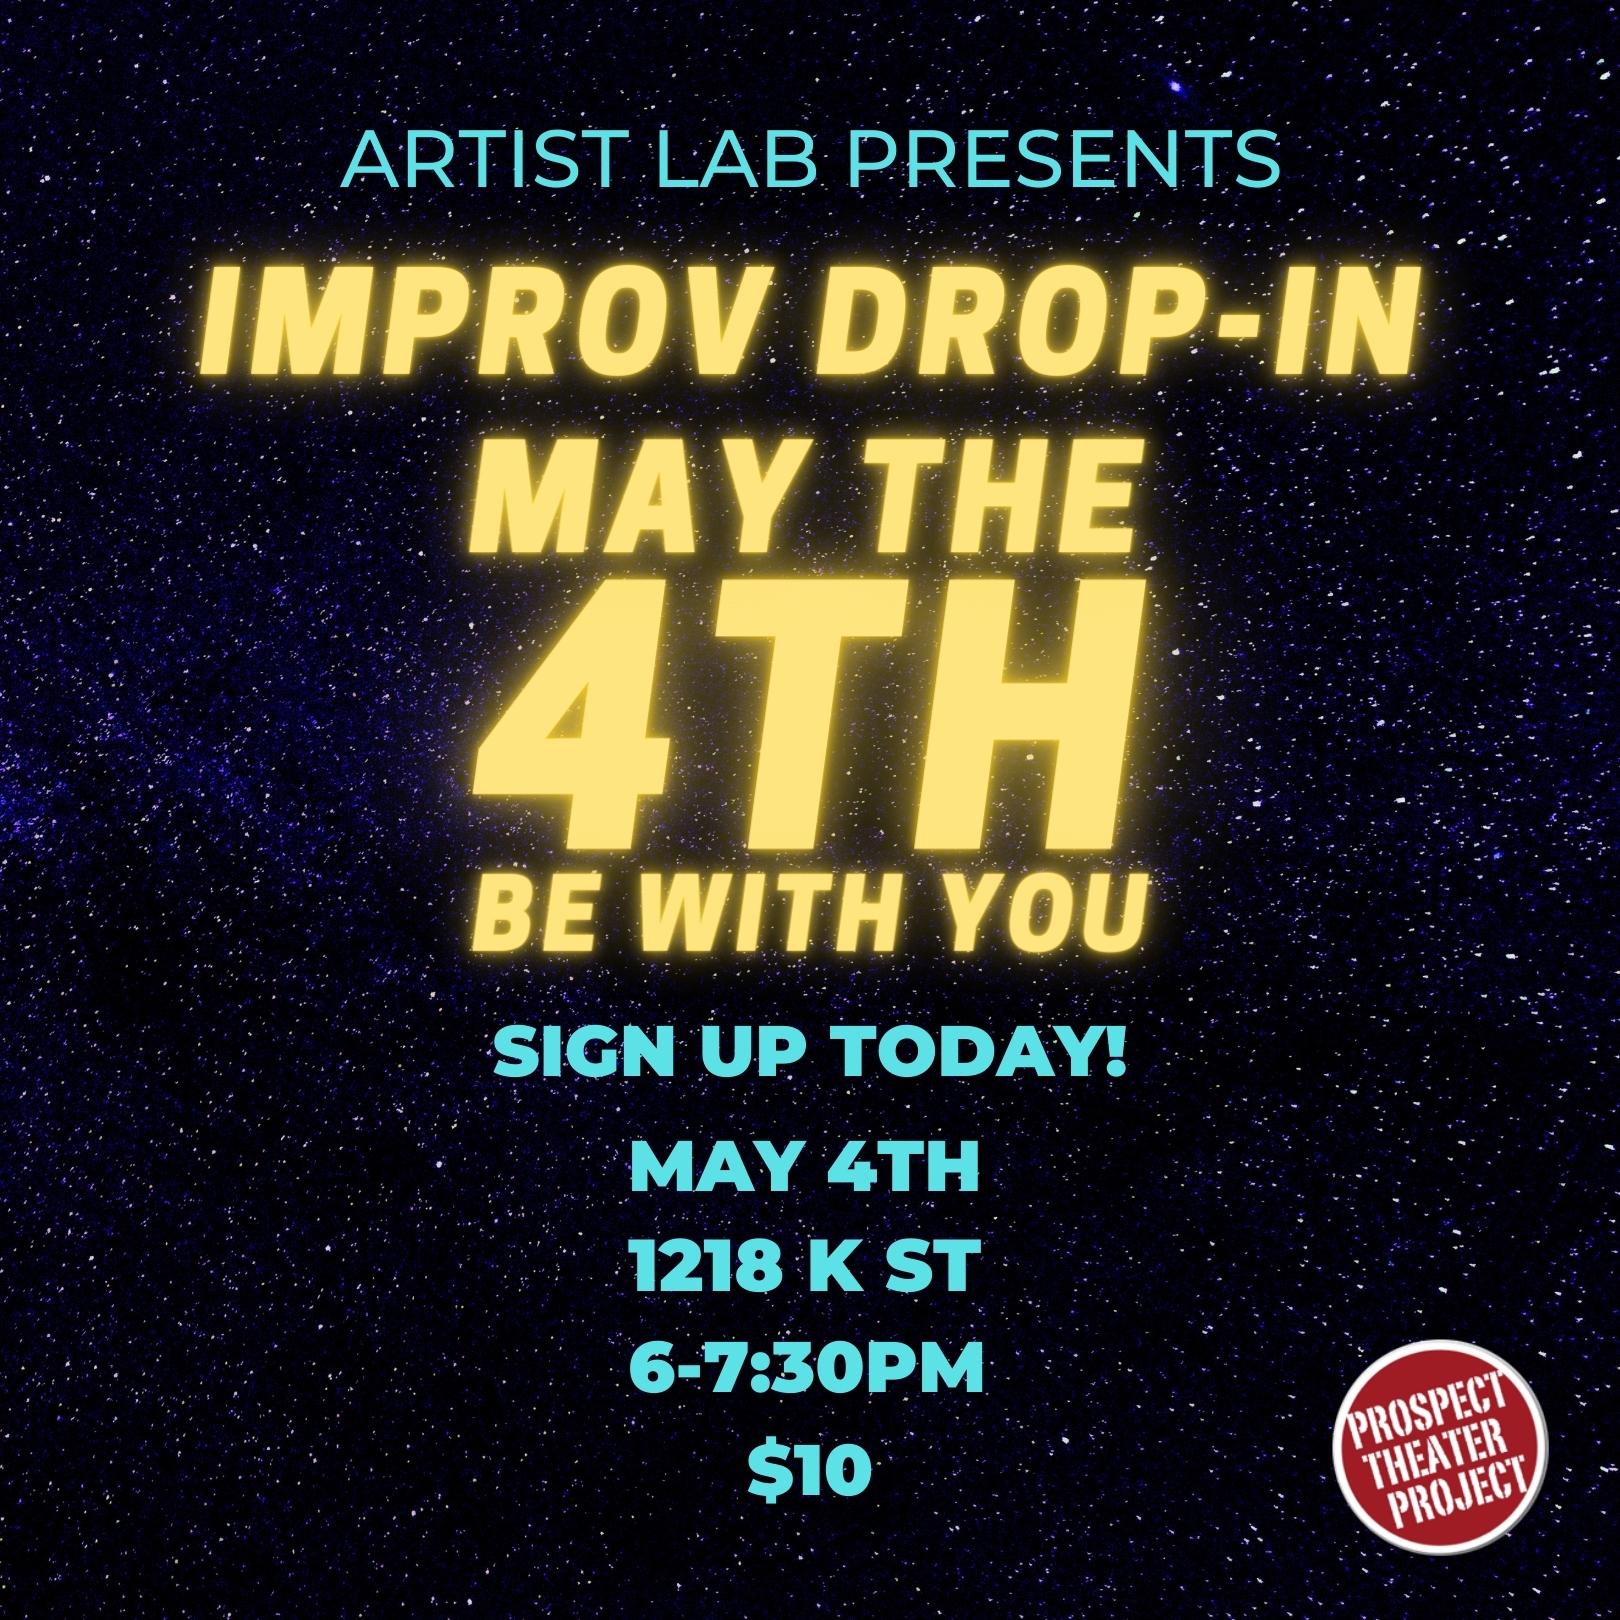 Improv Drop-In: May The 4th Be With You